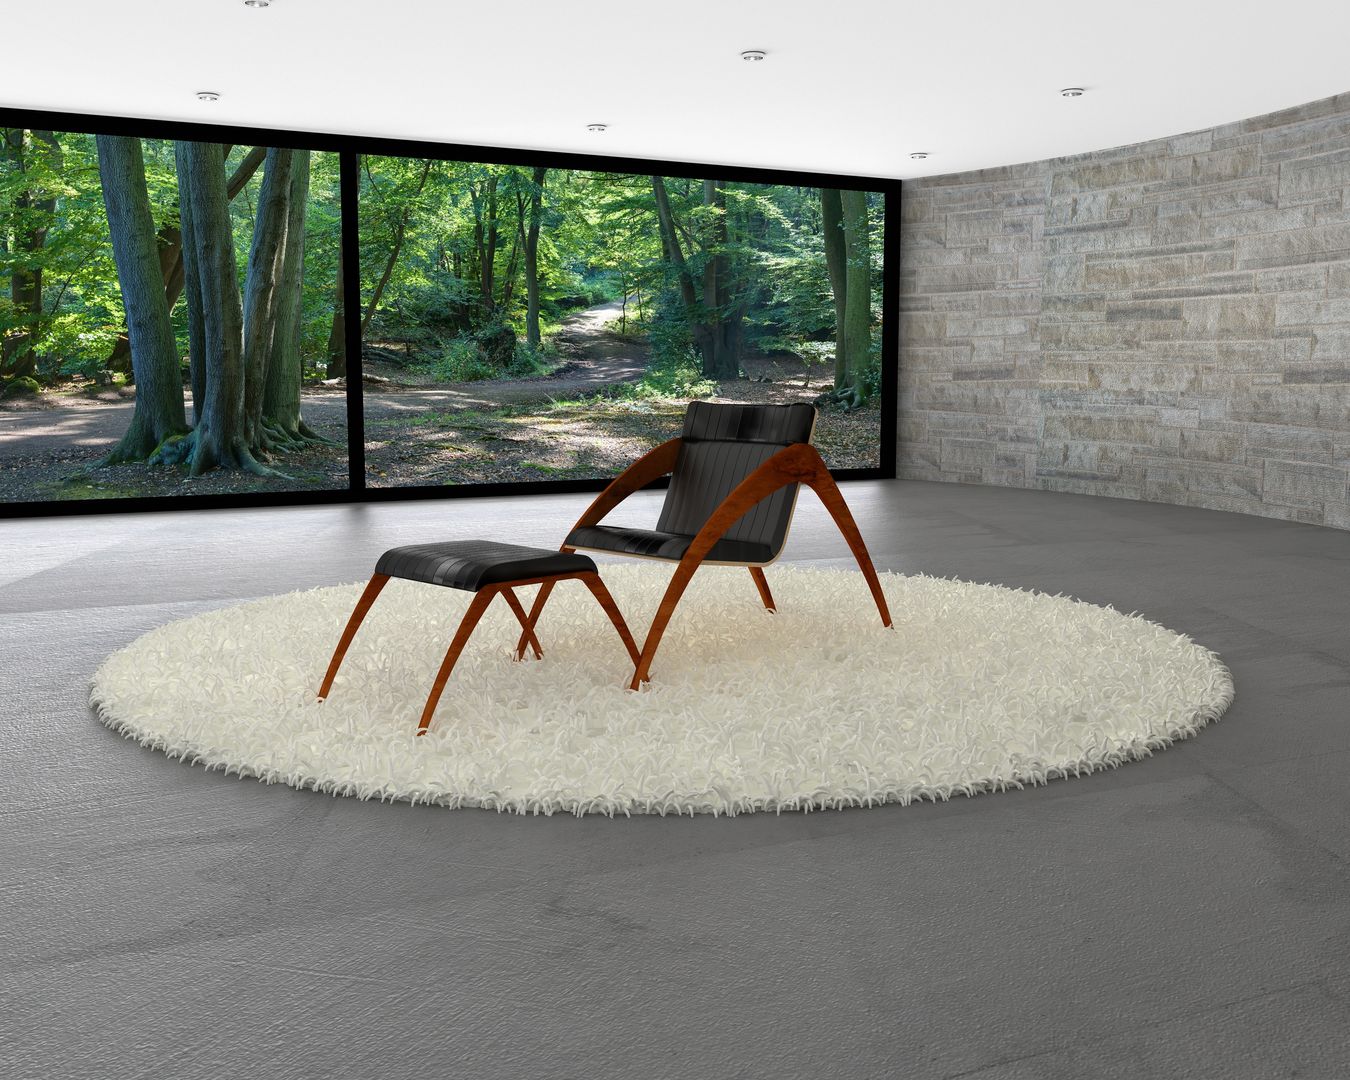 The Spider from Mars , Joana Magalhães Francisco Joana Magalhães Francisco Living room Wood Wood effect Stools & chairs